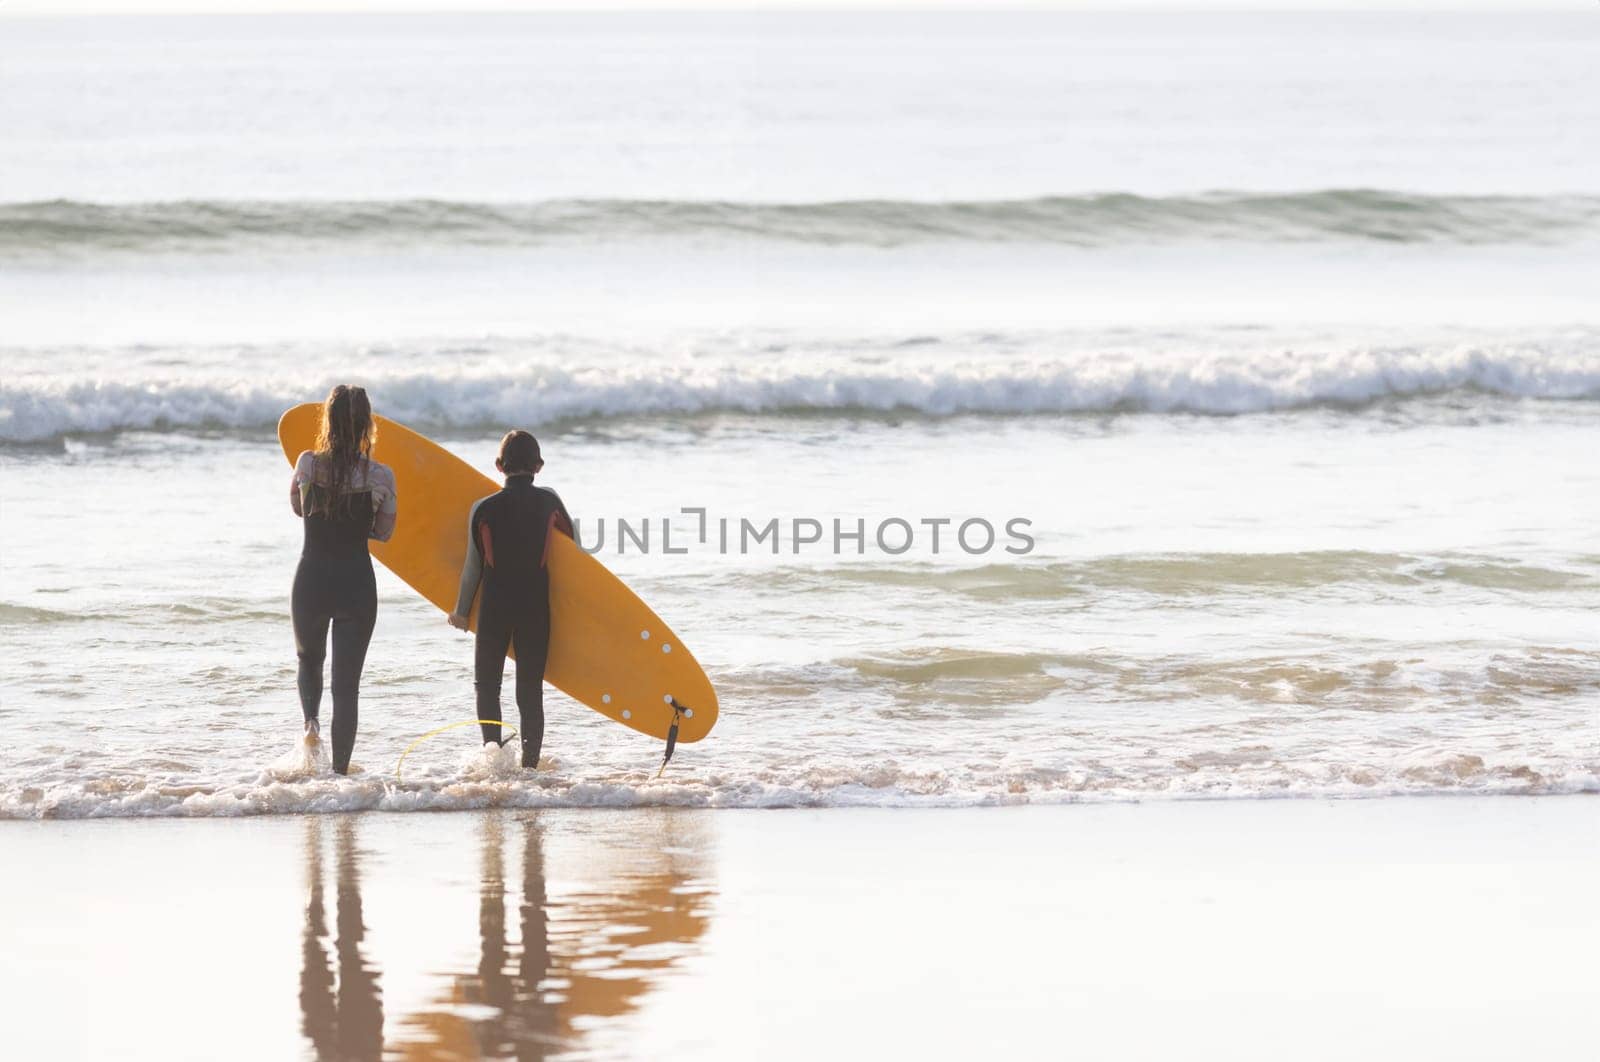 Mam and son Catching Waves in the Ocean by Studia72